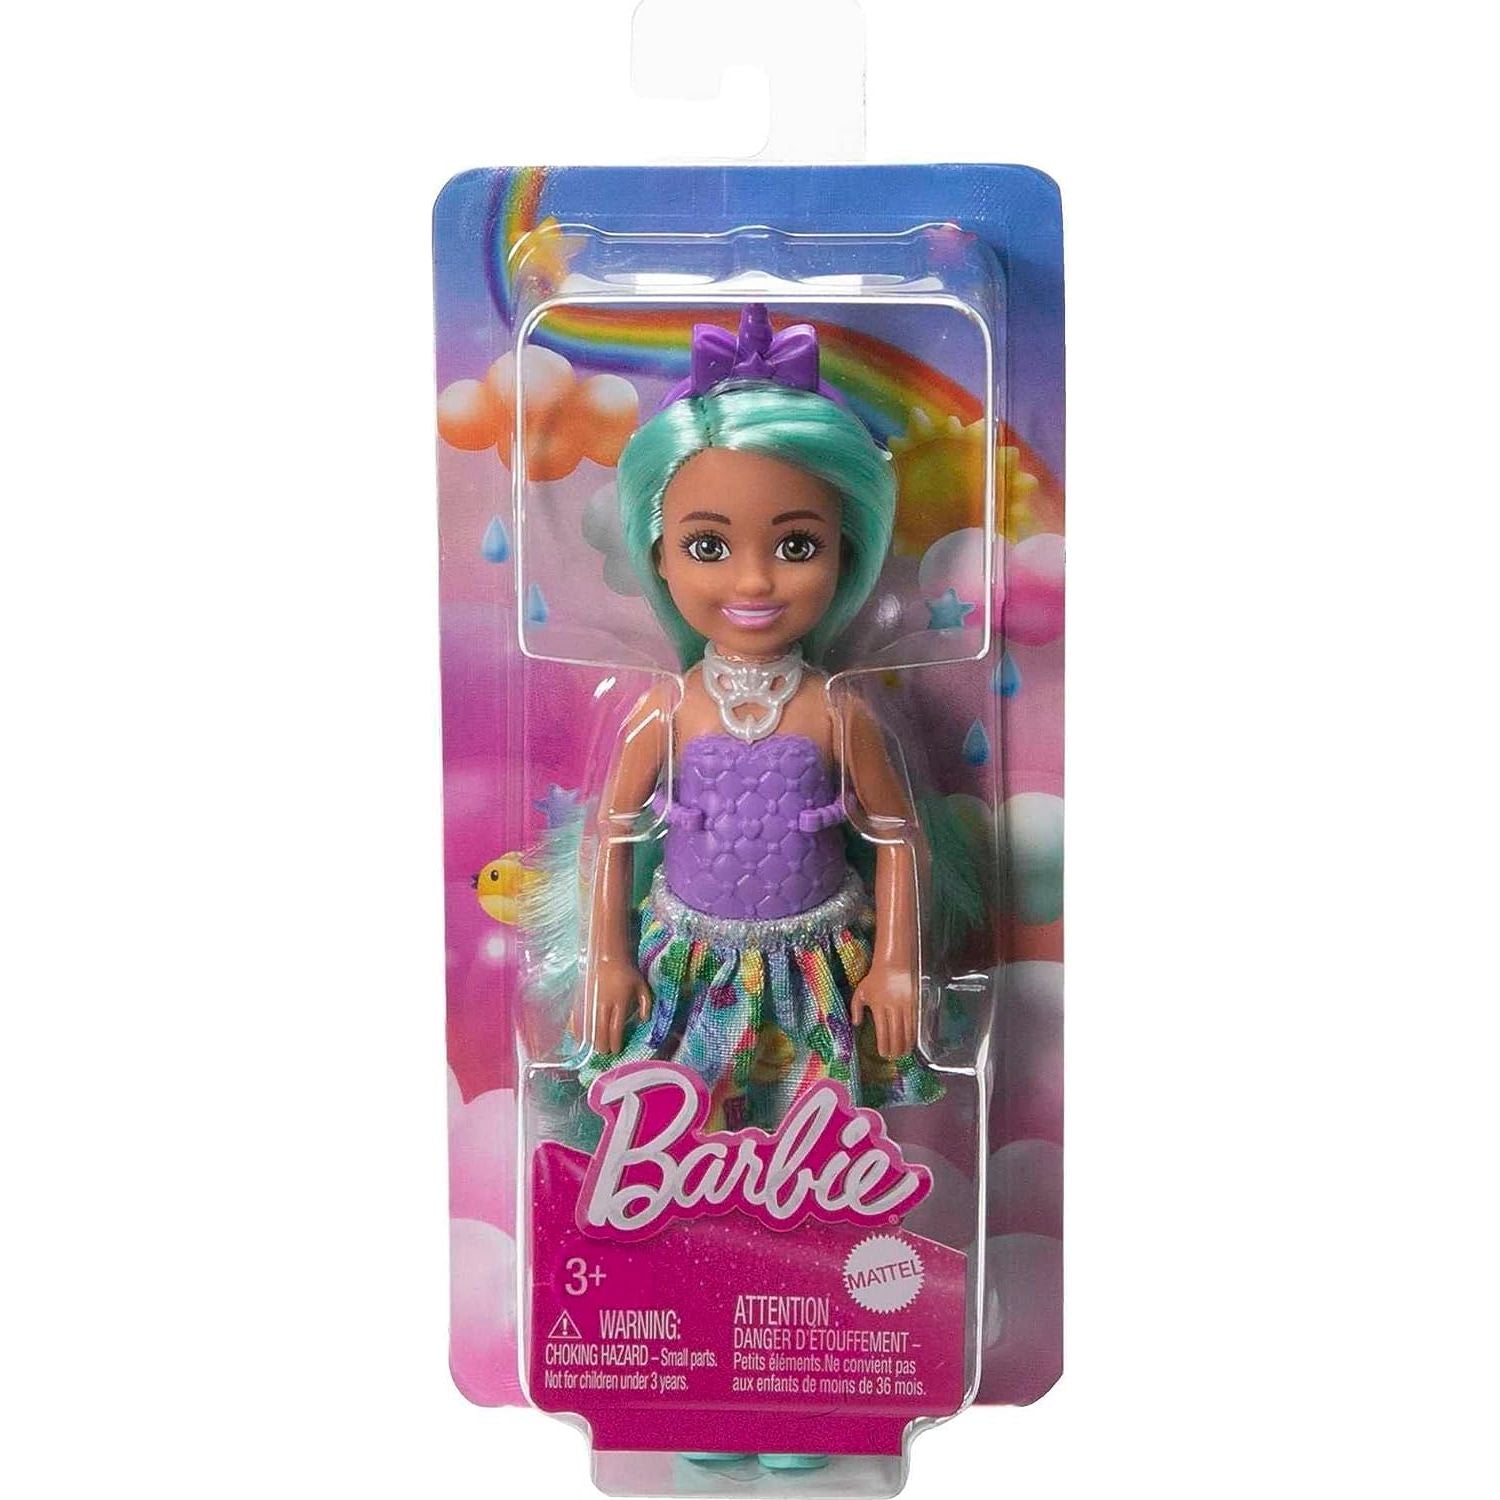 Barbie Unicorn-Inspired Chelsea Doll with Green Hair, Unicorn Toys, Horn Headband and Detachable Tail